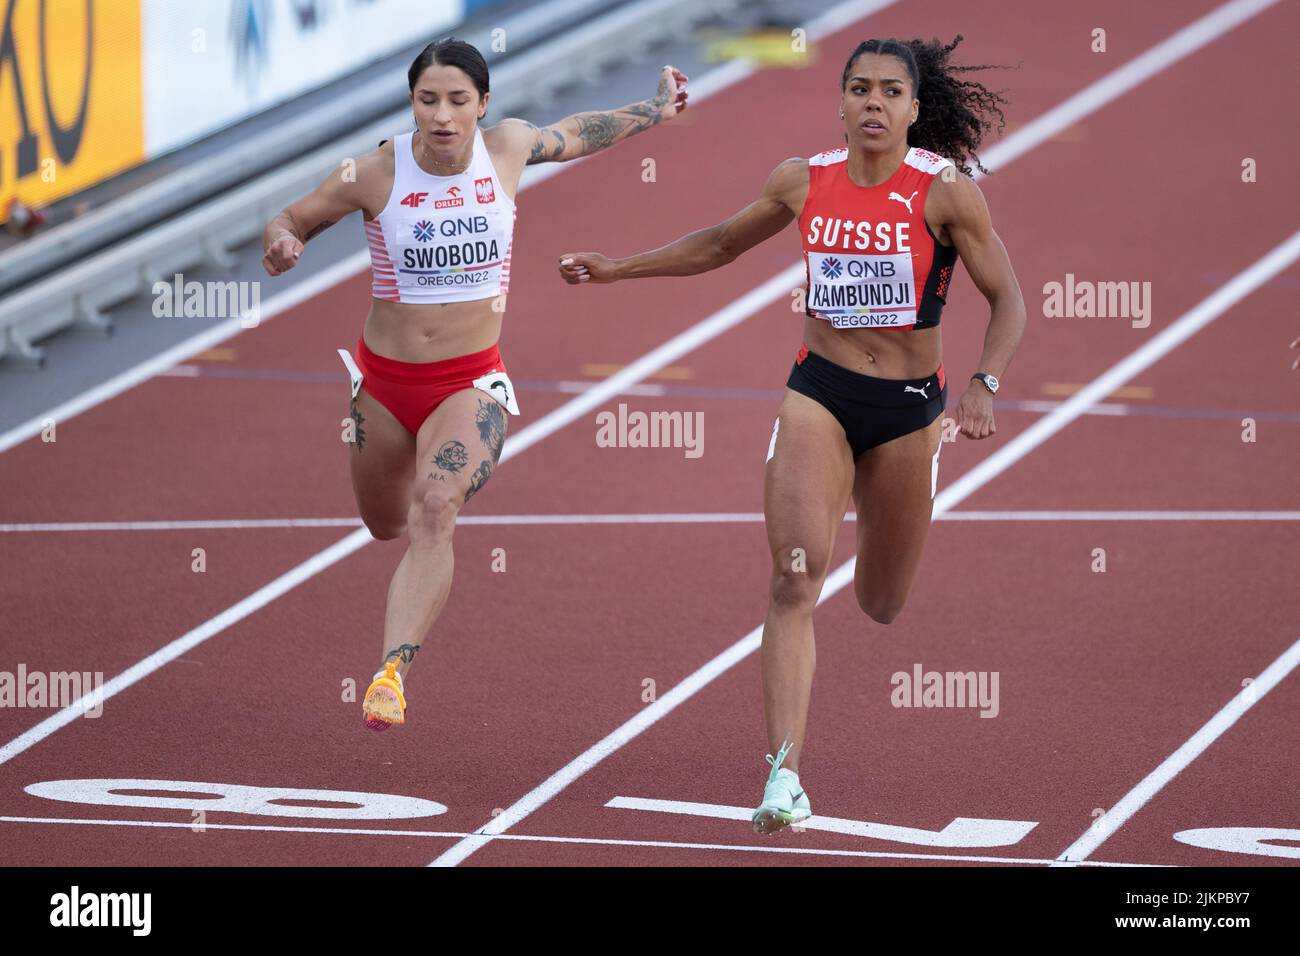 Ewa Swoboda (POL) 11.07 and Mujinga Kambundji (SUI) 10.97 qualify for the semi-finals with a time of 10.95 in the 100 meters during the afternoon sess Stock Photo